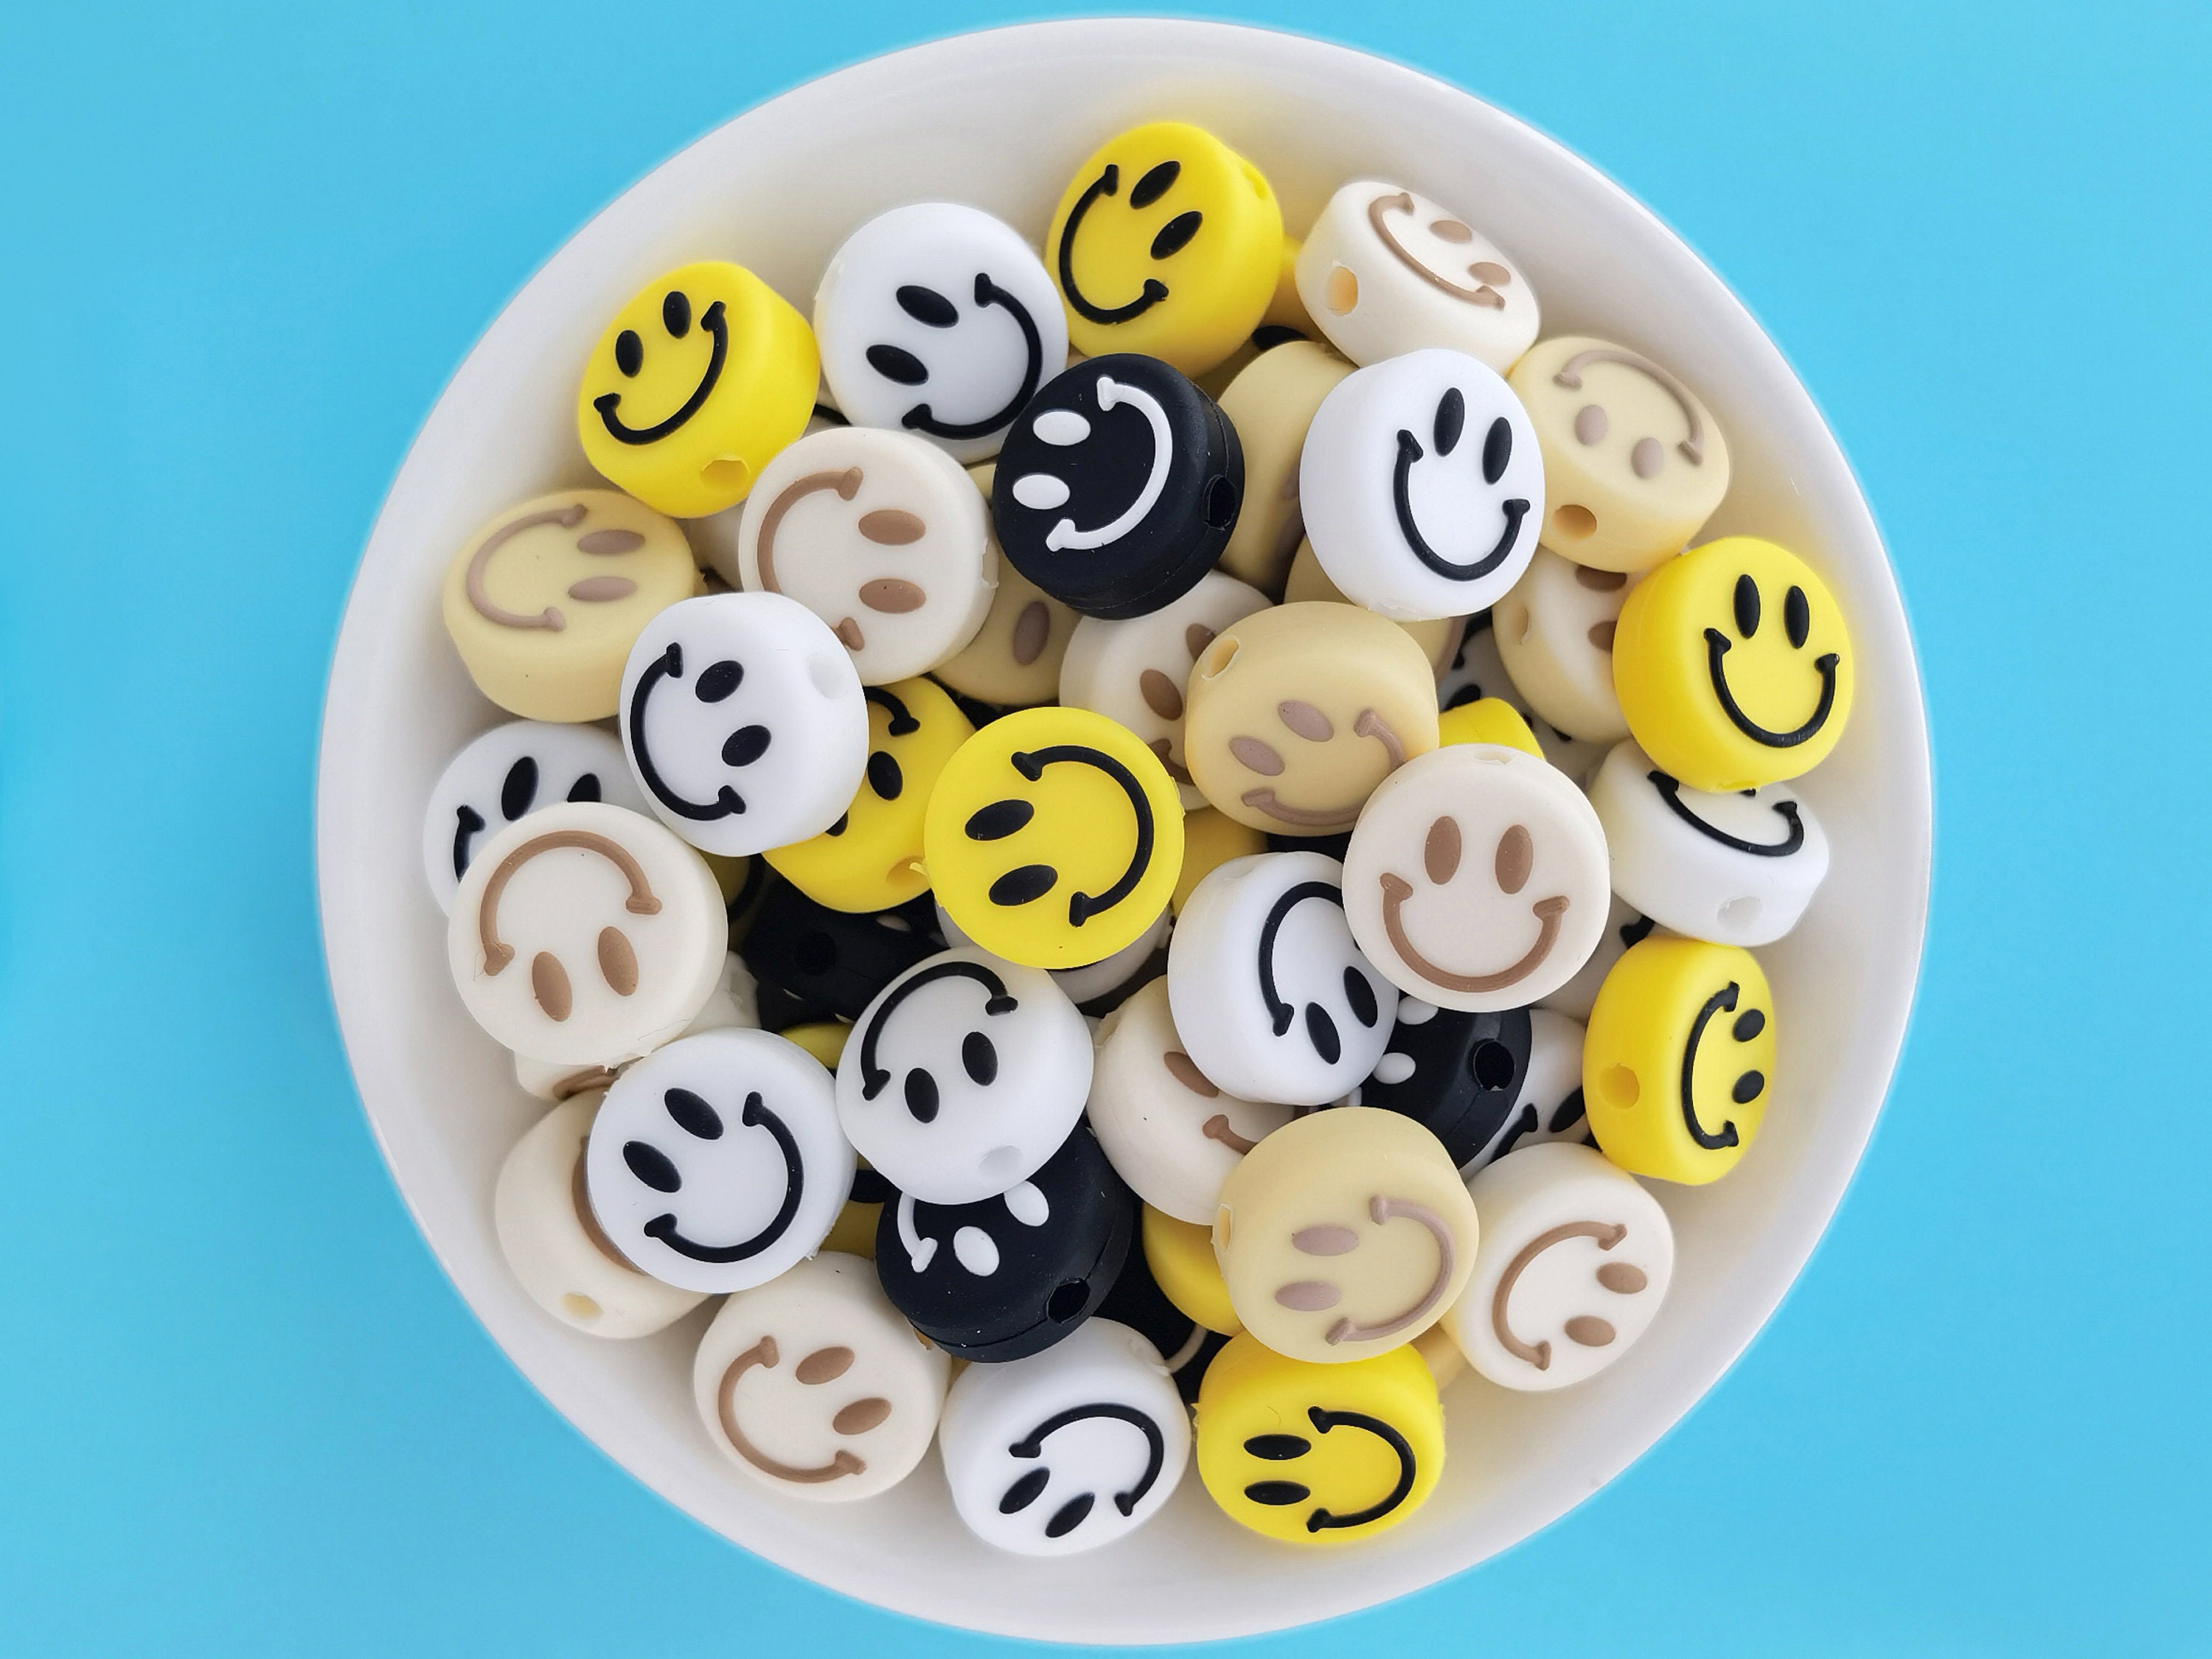 7mm acrylic smiley face beads, translucent rainbow, acrylic jewelry beads  beads for kids, smiley face, jewelry making beads